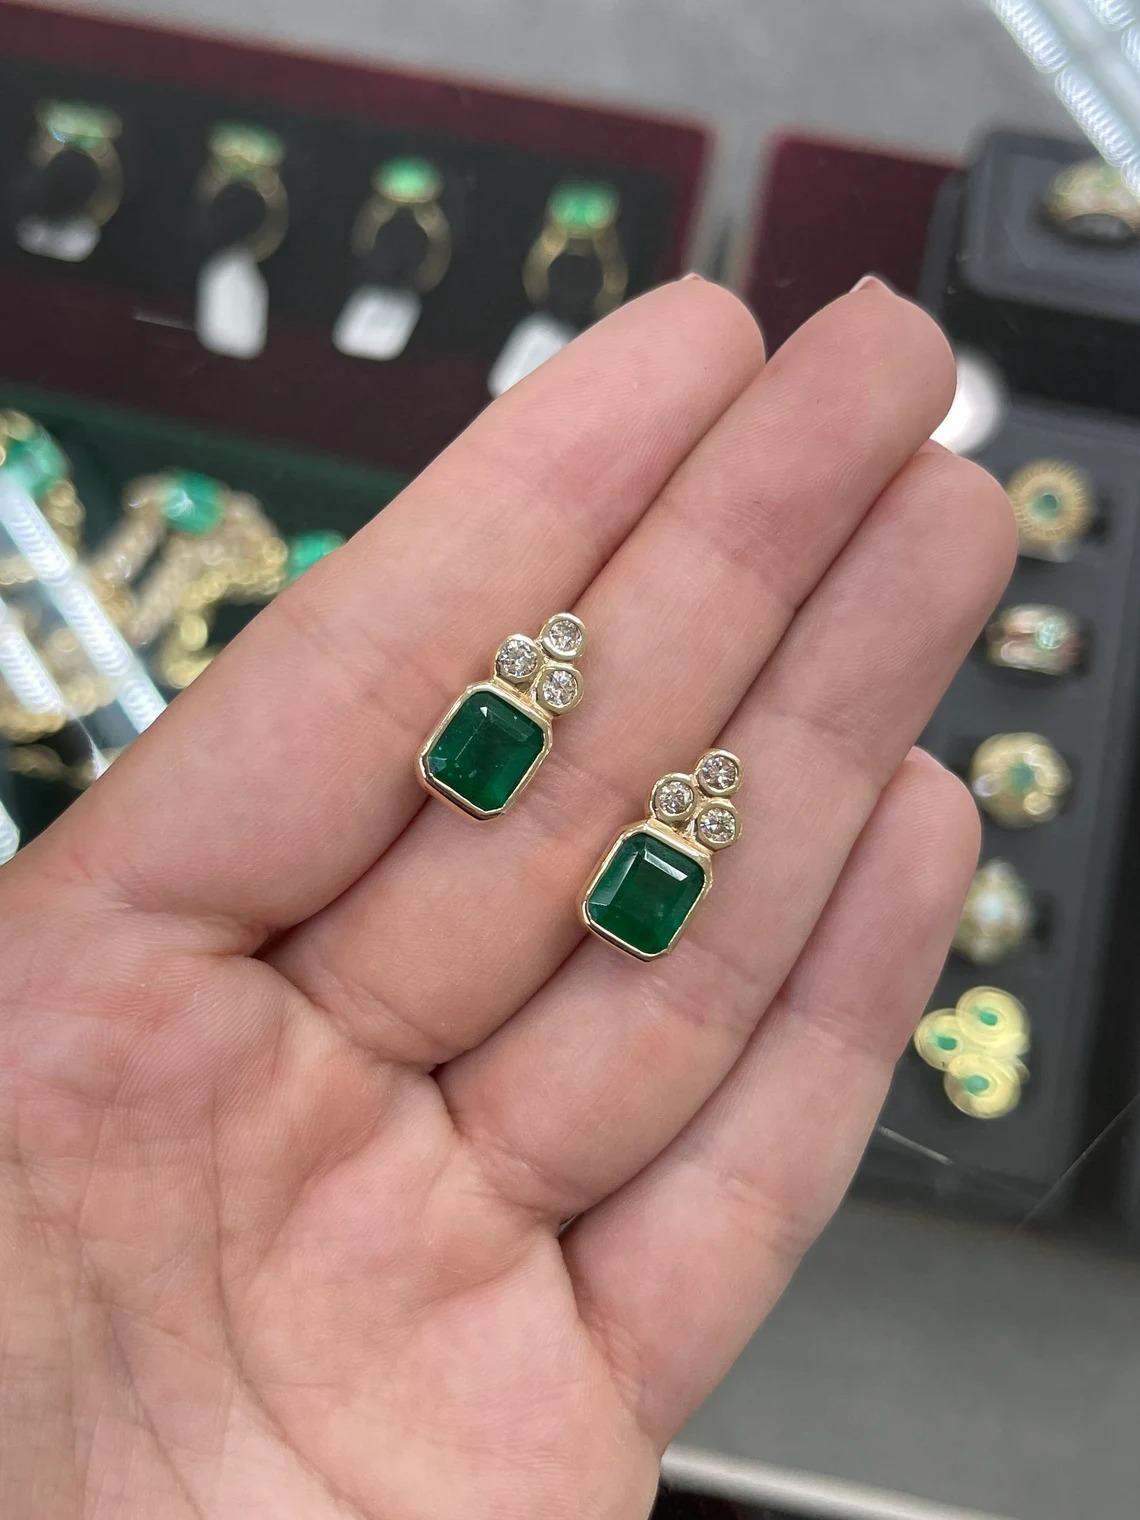 Elegance defined! These large dark rare green emerald and diamond earrings are fashioned in solid hand-made in 14k yellow gold. These studs feature natural emerald cut emeralds accented with natural brilliant white diamonds. The emeralds have a